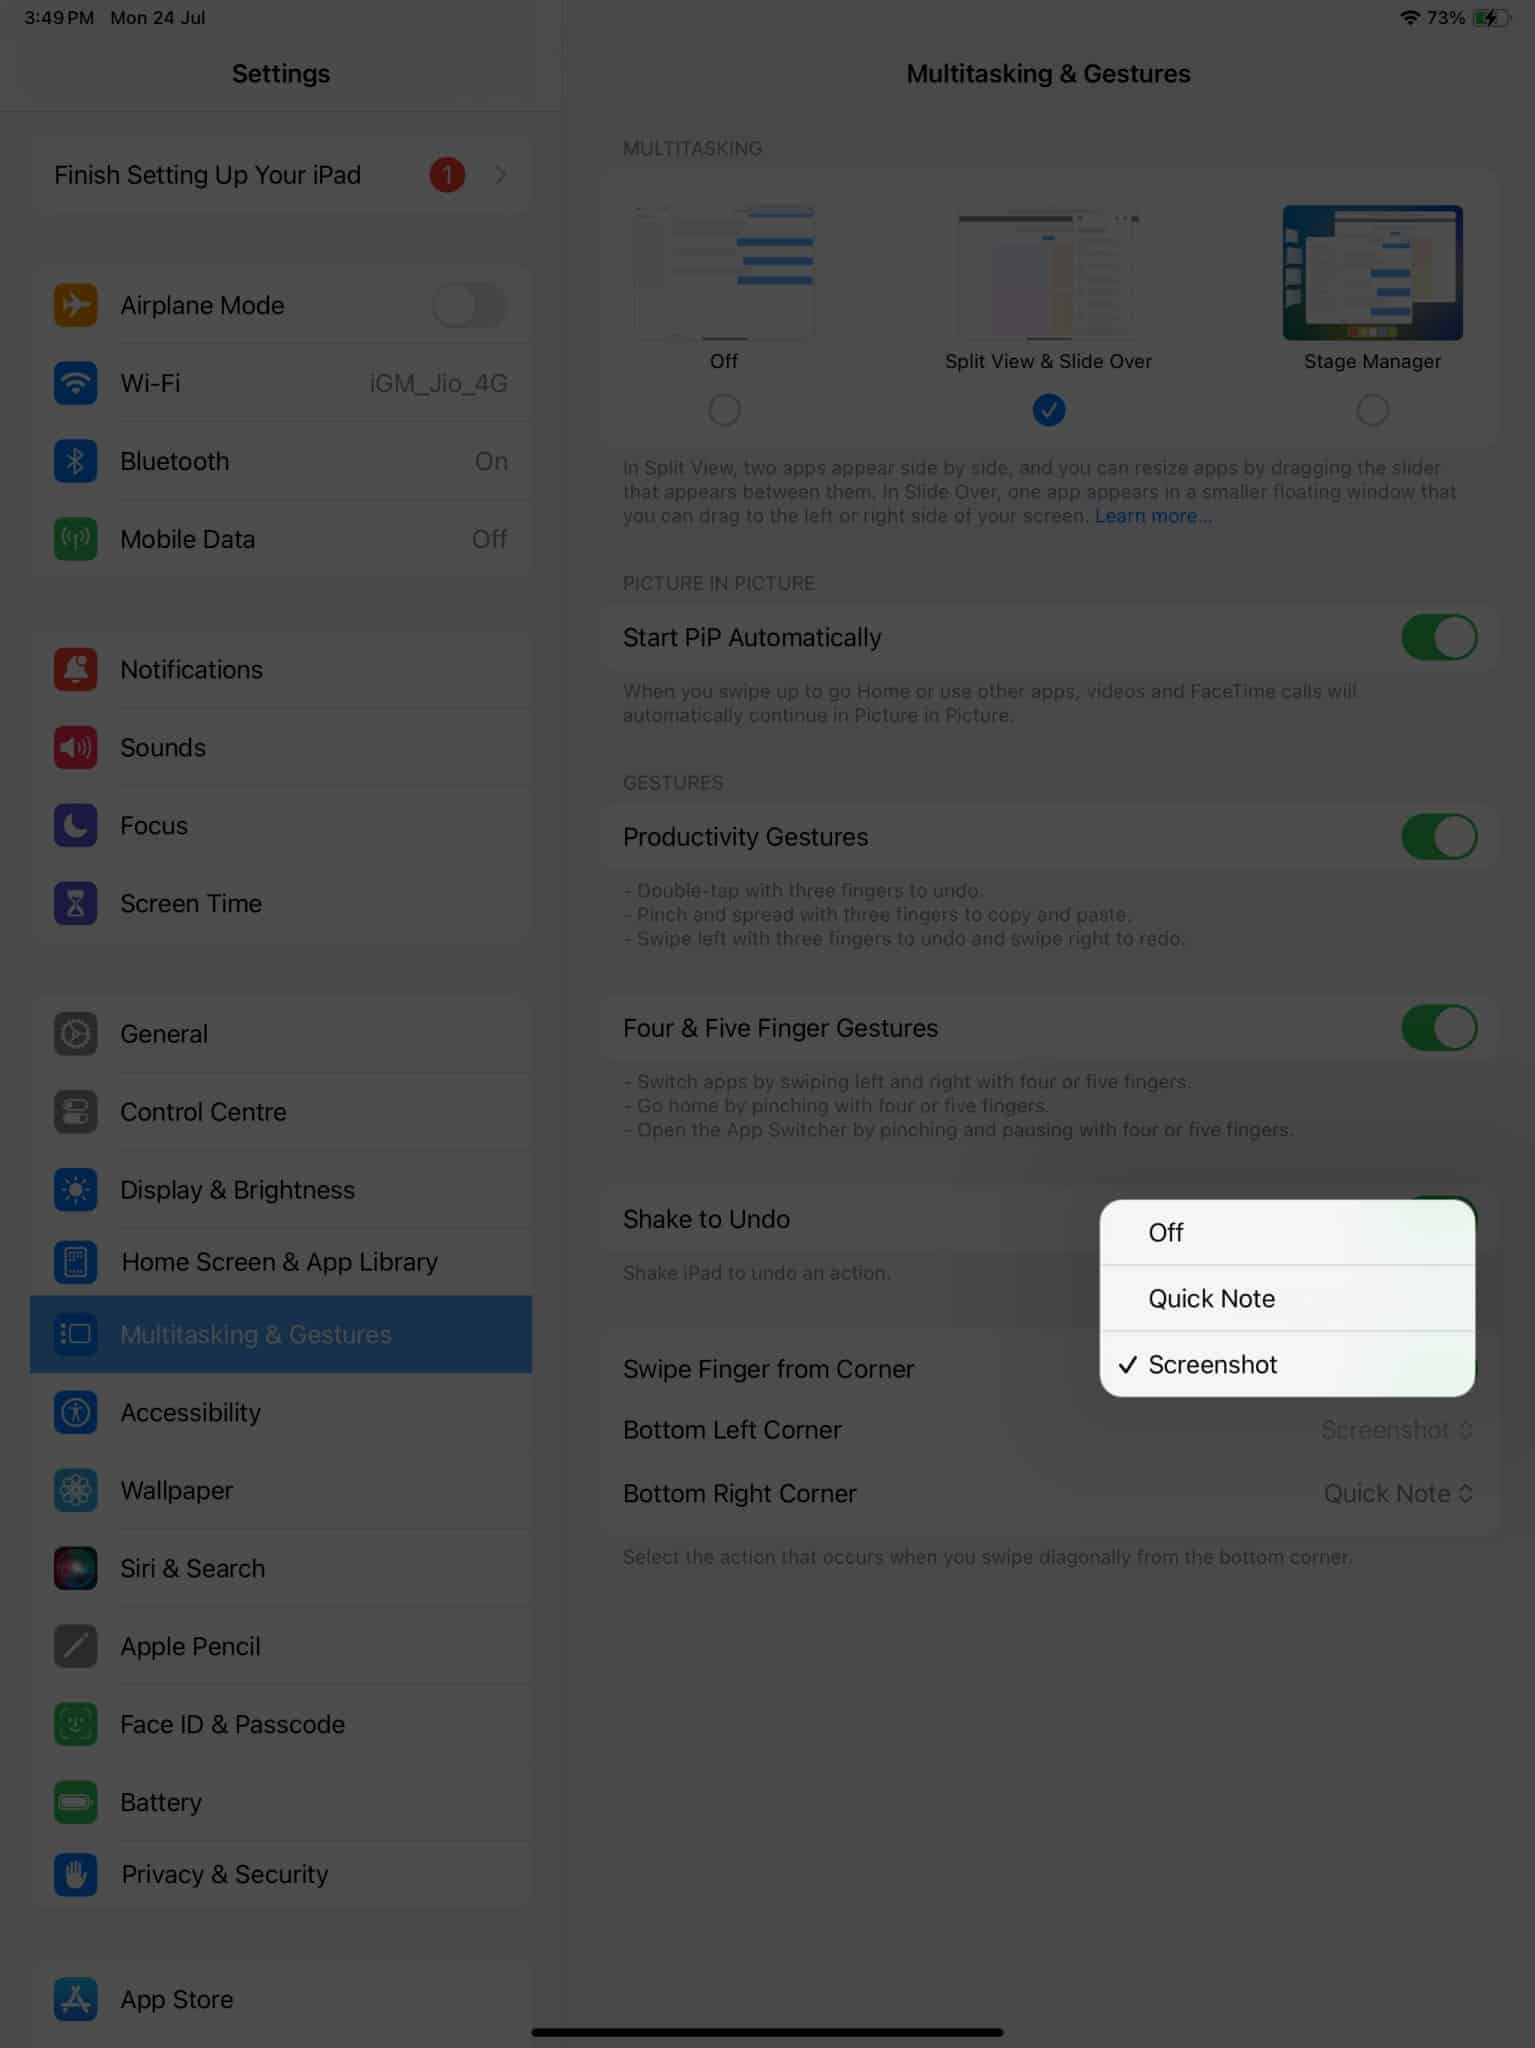 Select among Off Screenshots Quick Note in settings